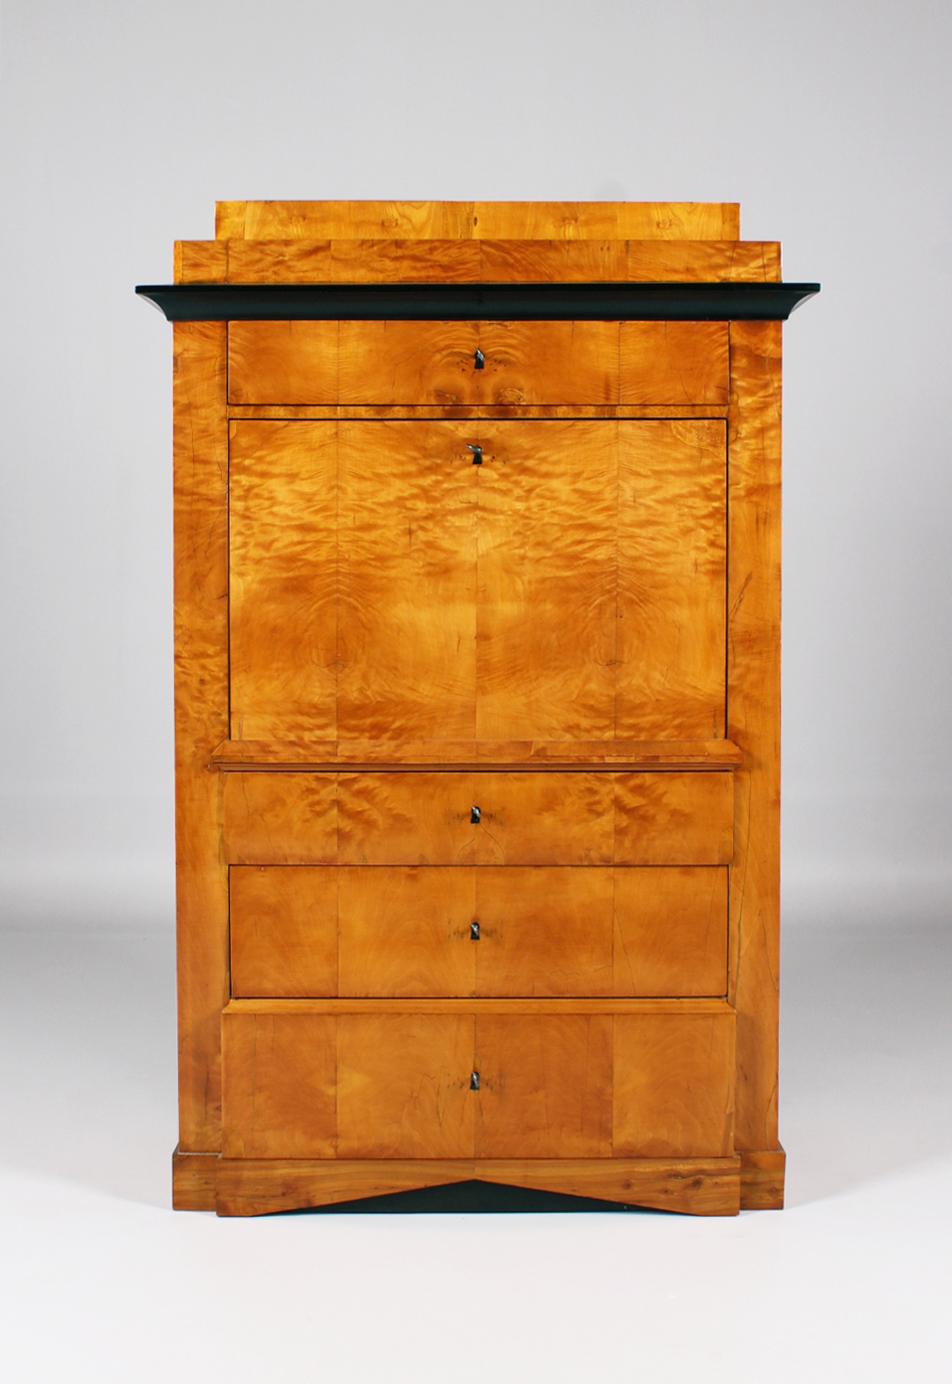 Plain Biedermeier secretary

Middle Germany
Birch
Biedermeier around 1830

Dimensions: H x W x D: 162 x 104 x 49 cm

Description:
Secretary standing on a skirting board with three drawers at the bottom, the writing flap above and another